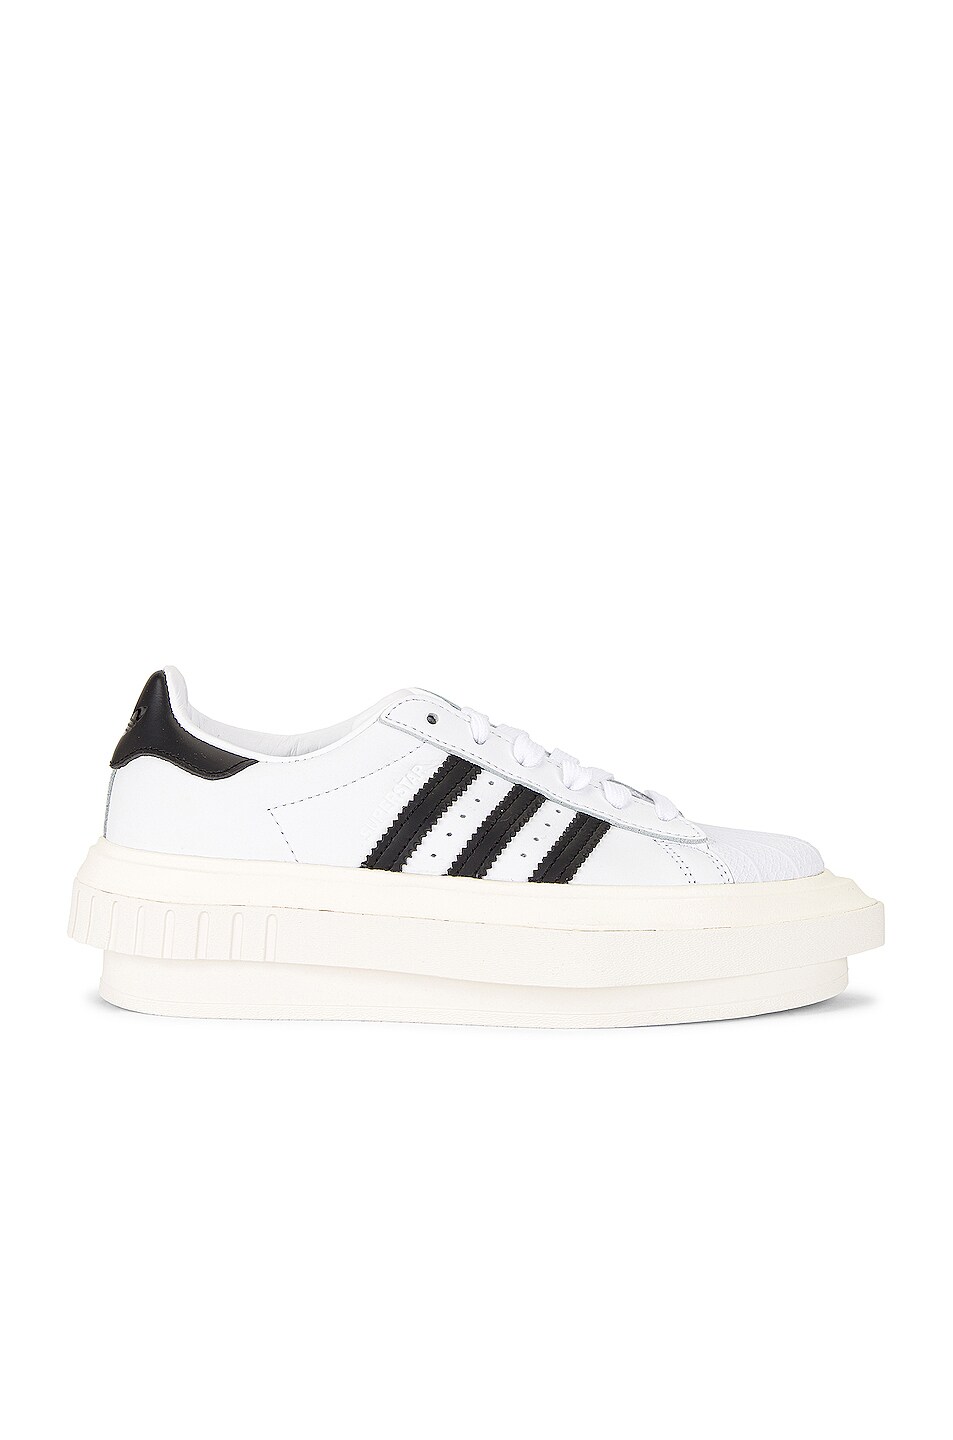 Image 1 of adidas Originals x Beyonce Sstar Superstar Sneaker in White & Core Black & Off White